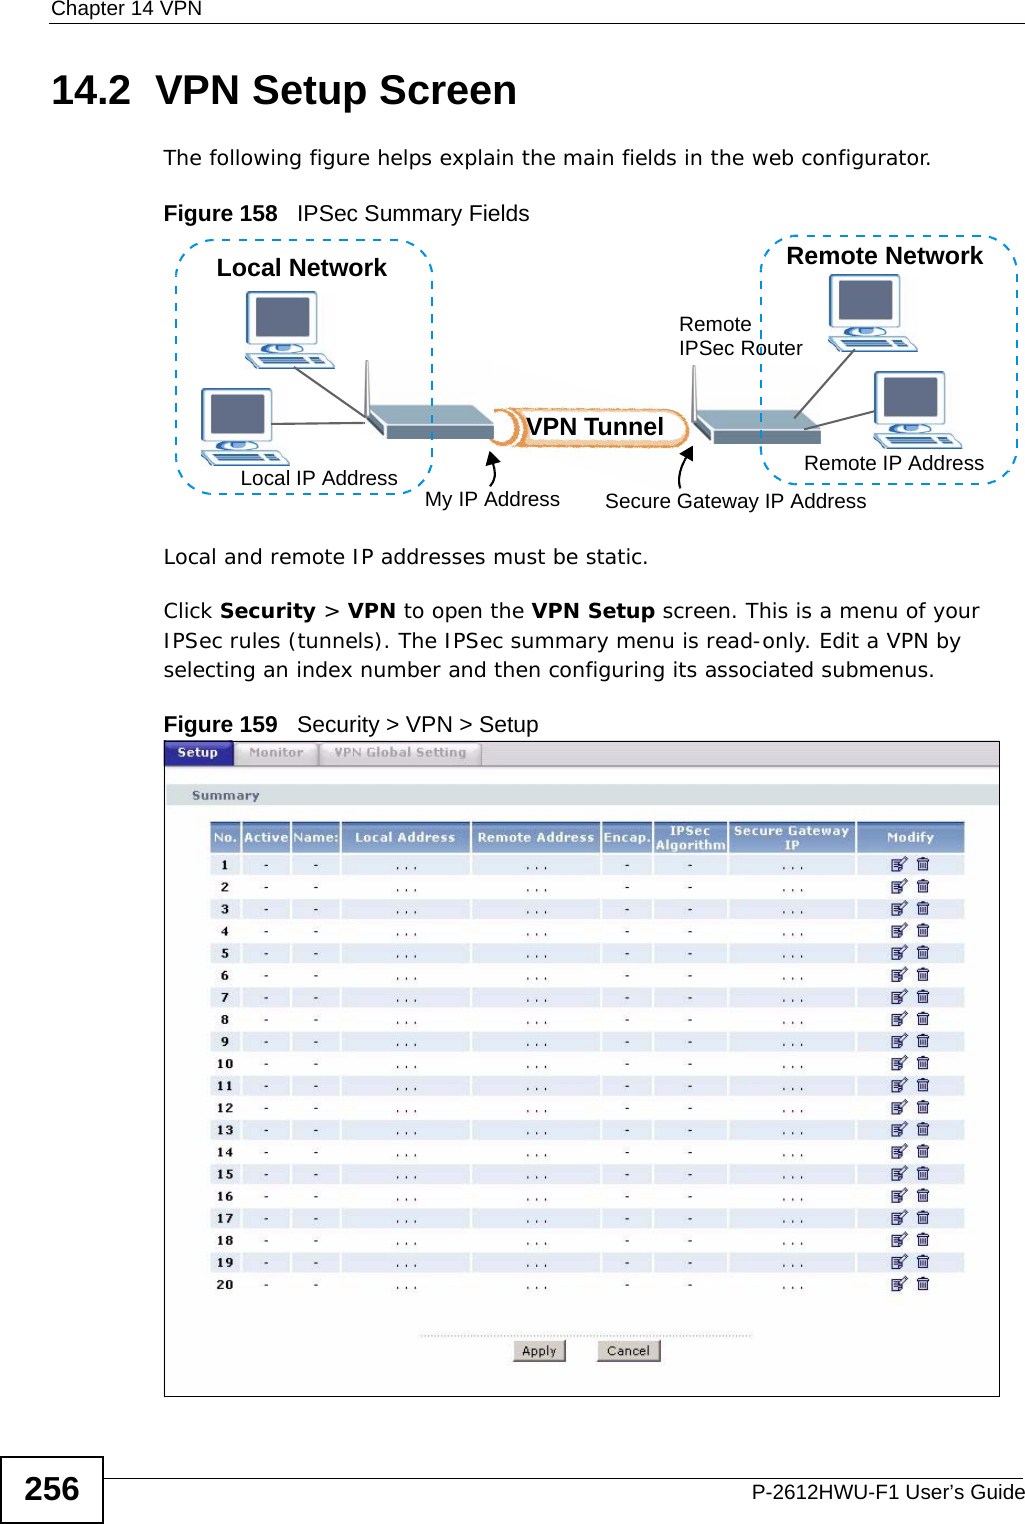 Chapter 14 VPNP-2612HWU-F1 User’s Guide25614.2  VPN Setup Screen The following figure helps explain the main fields in the web configurator.Figure 158   IPSec Summary FieldsLocal and remote IP addresses must be static.Click Security &gt; VPN to open the VPN Setup screen. This is a menu of your IPSec rules (tunnels). The IPSec summary menu is read-only. Edit a VPN by selecting an index number and then configuring its associated submenus.Figure 159   Security &gt; VPN &gt; SetupLocal NetworkLocal IP Address My IP Address Secure Gateway IP AddressRemote NetworkRemote IP AddressRemote IPSec RouterVPN Tunnel